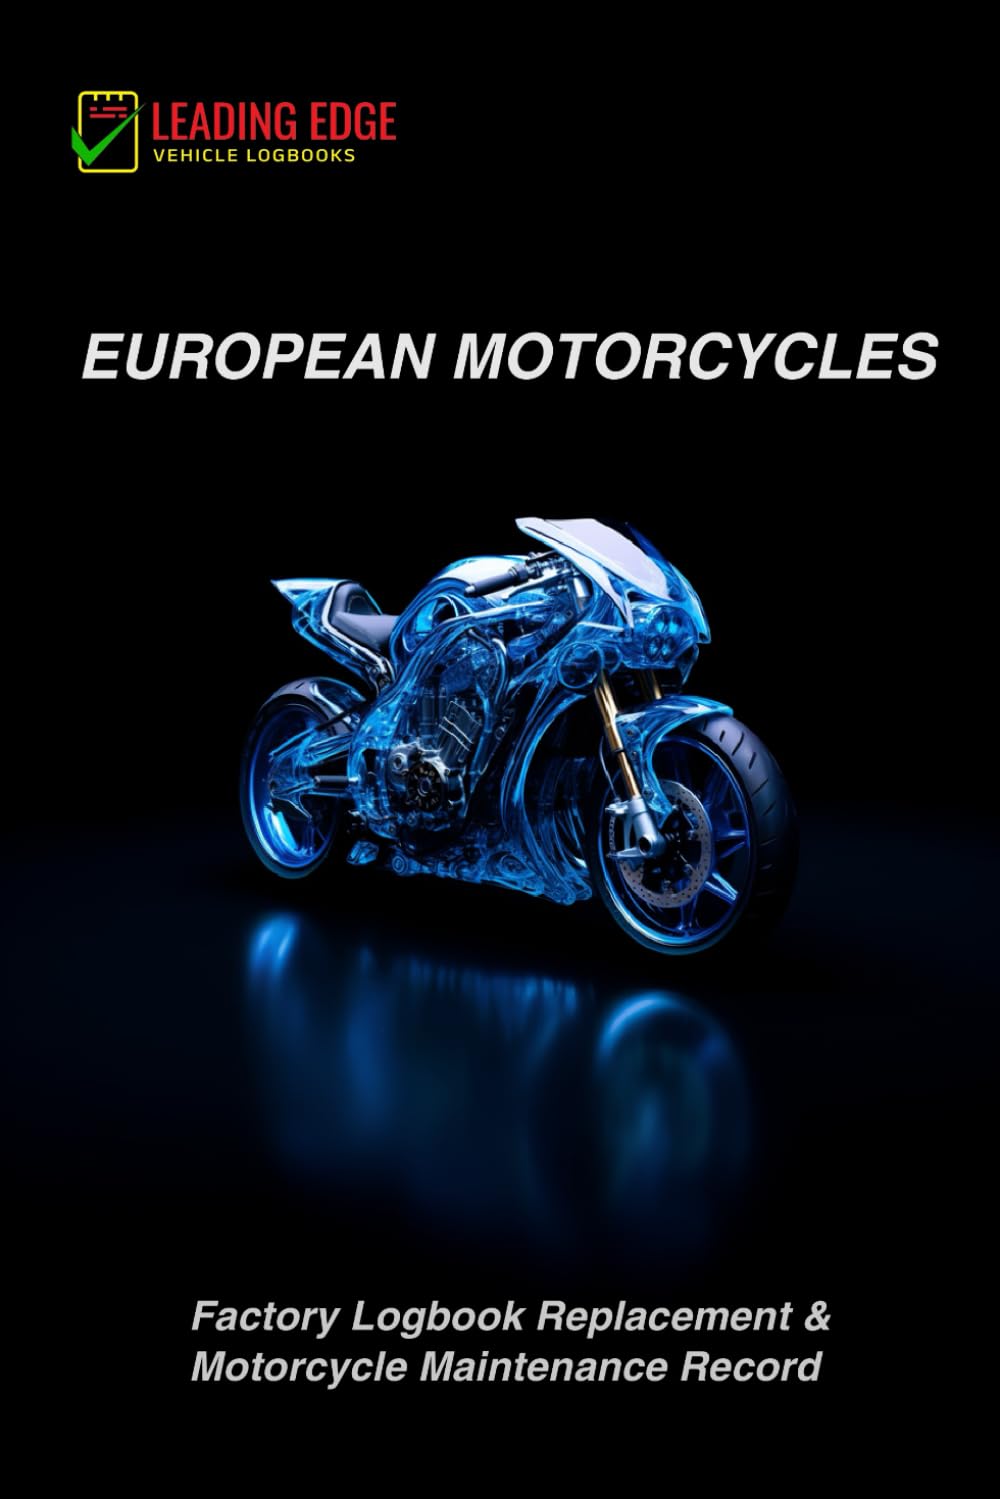 European Motorcycles - Replacement factory Logbook and Vehicle maintenance record: Comprehensive Service Tracker and History Journal for Optimal Motorcycle Performance